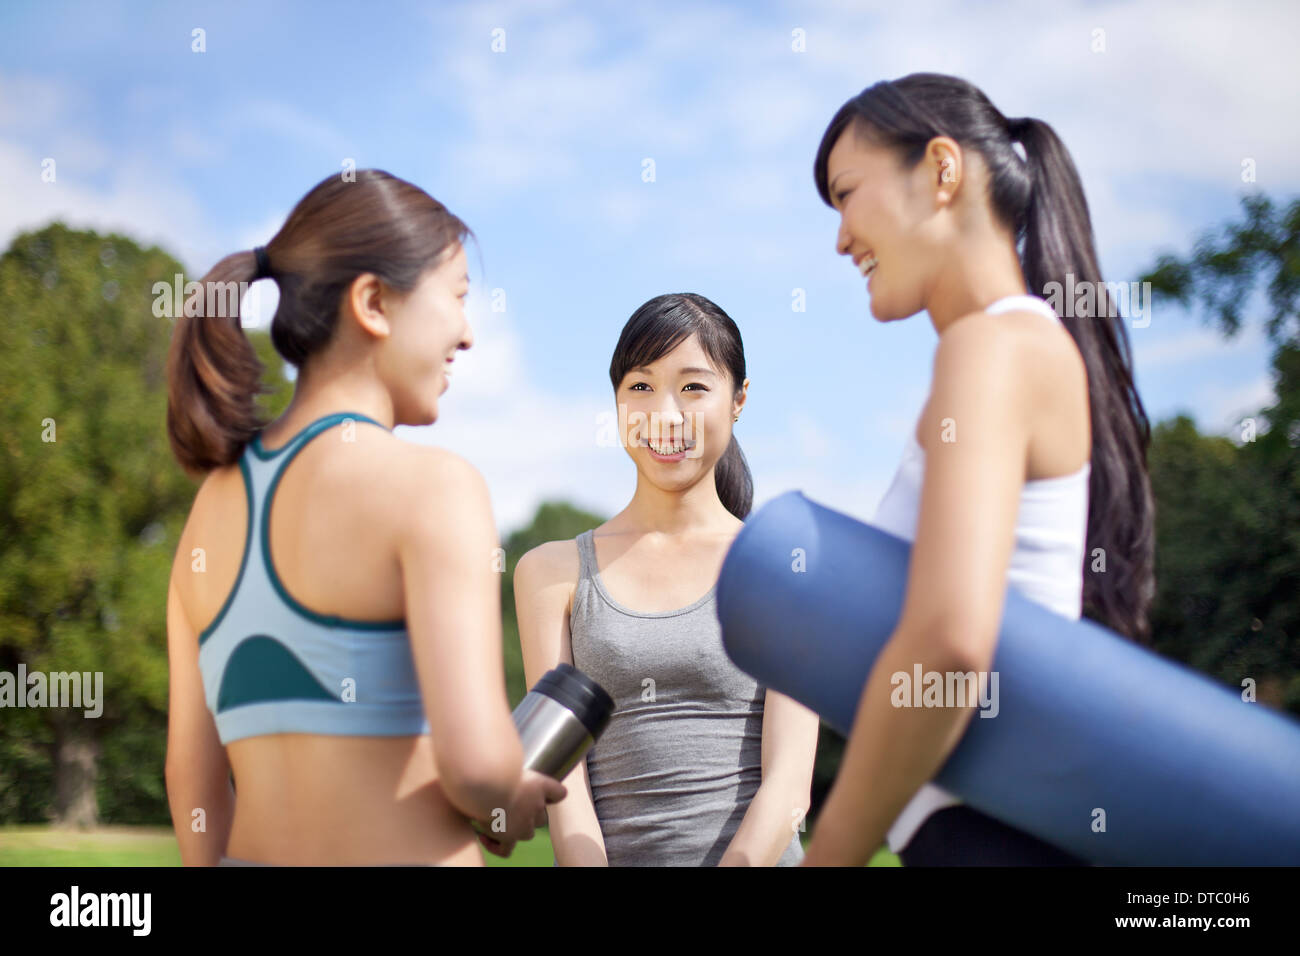 Three young women preparing for yoga practice in park Stock Photo